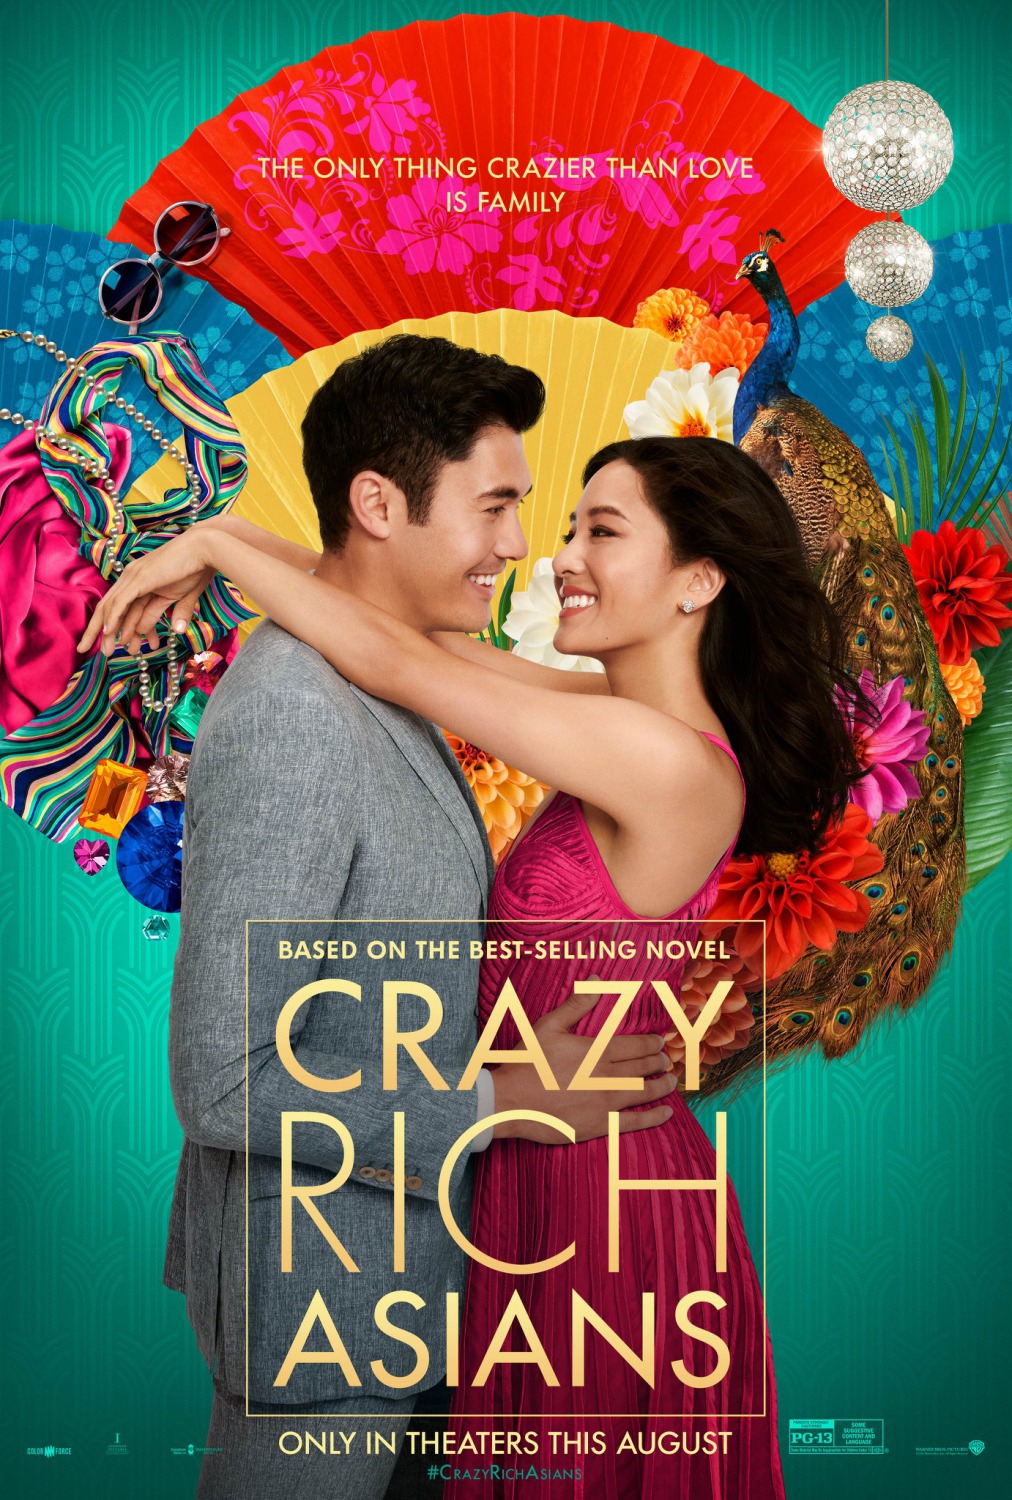 Crazy Rich Asians No. 1 at weekend box office